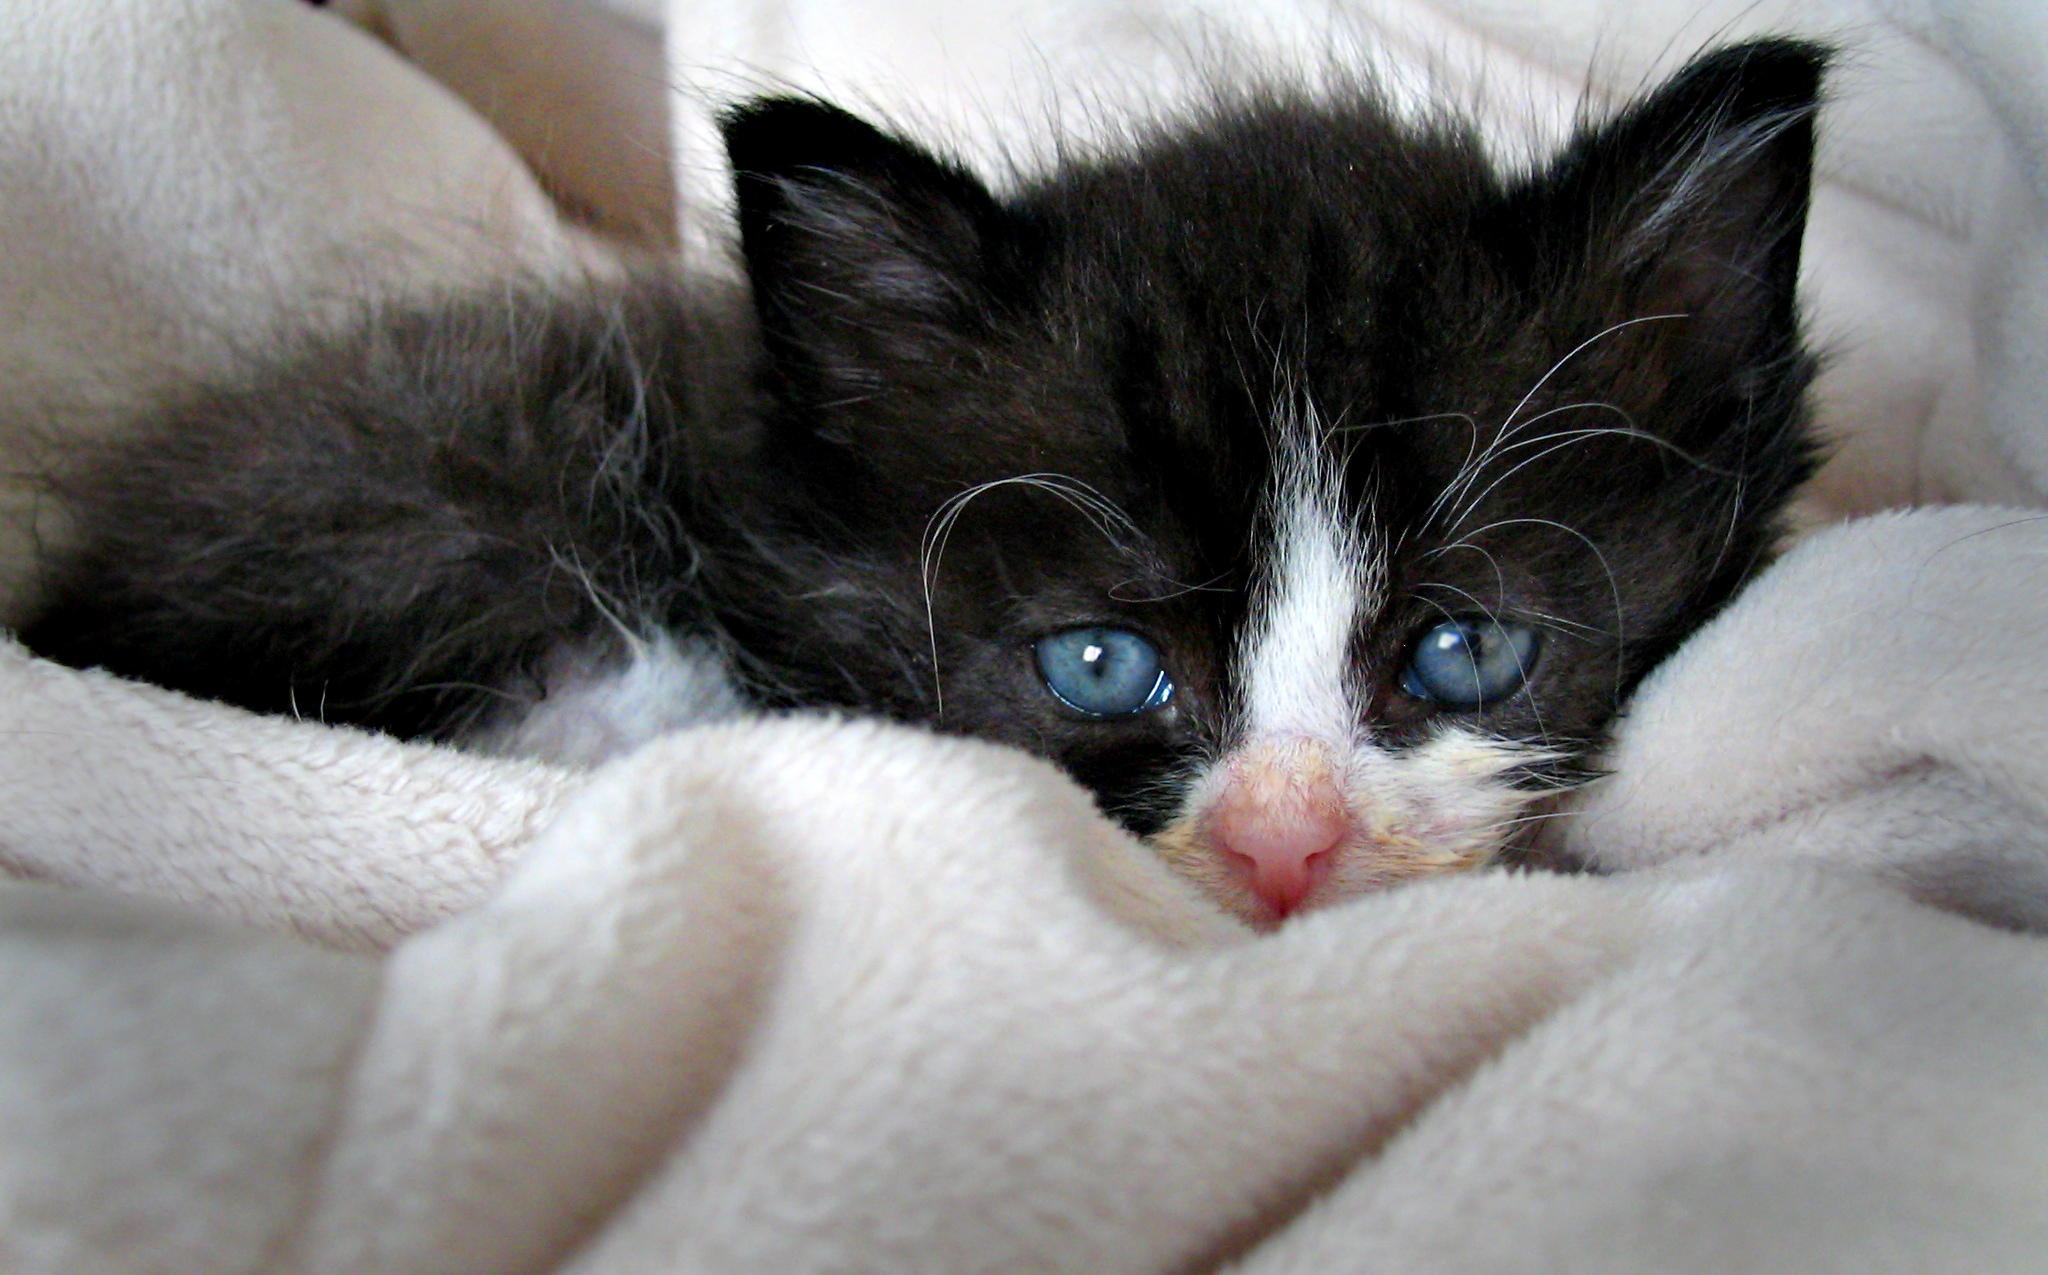 the small black and white kitten has very blue eyes